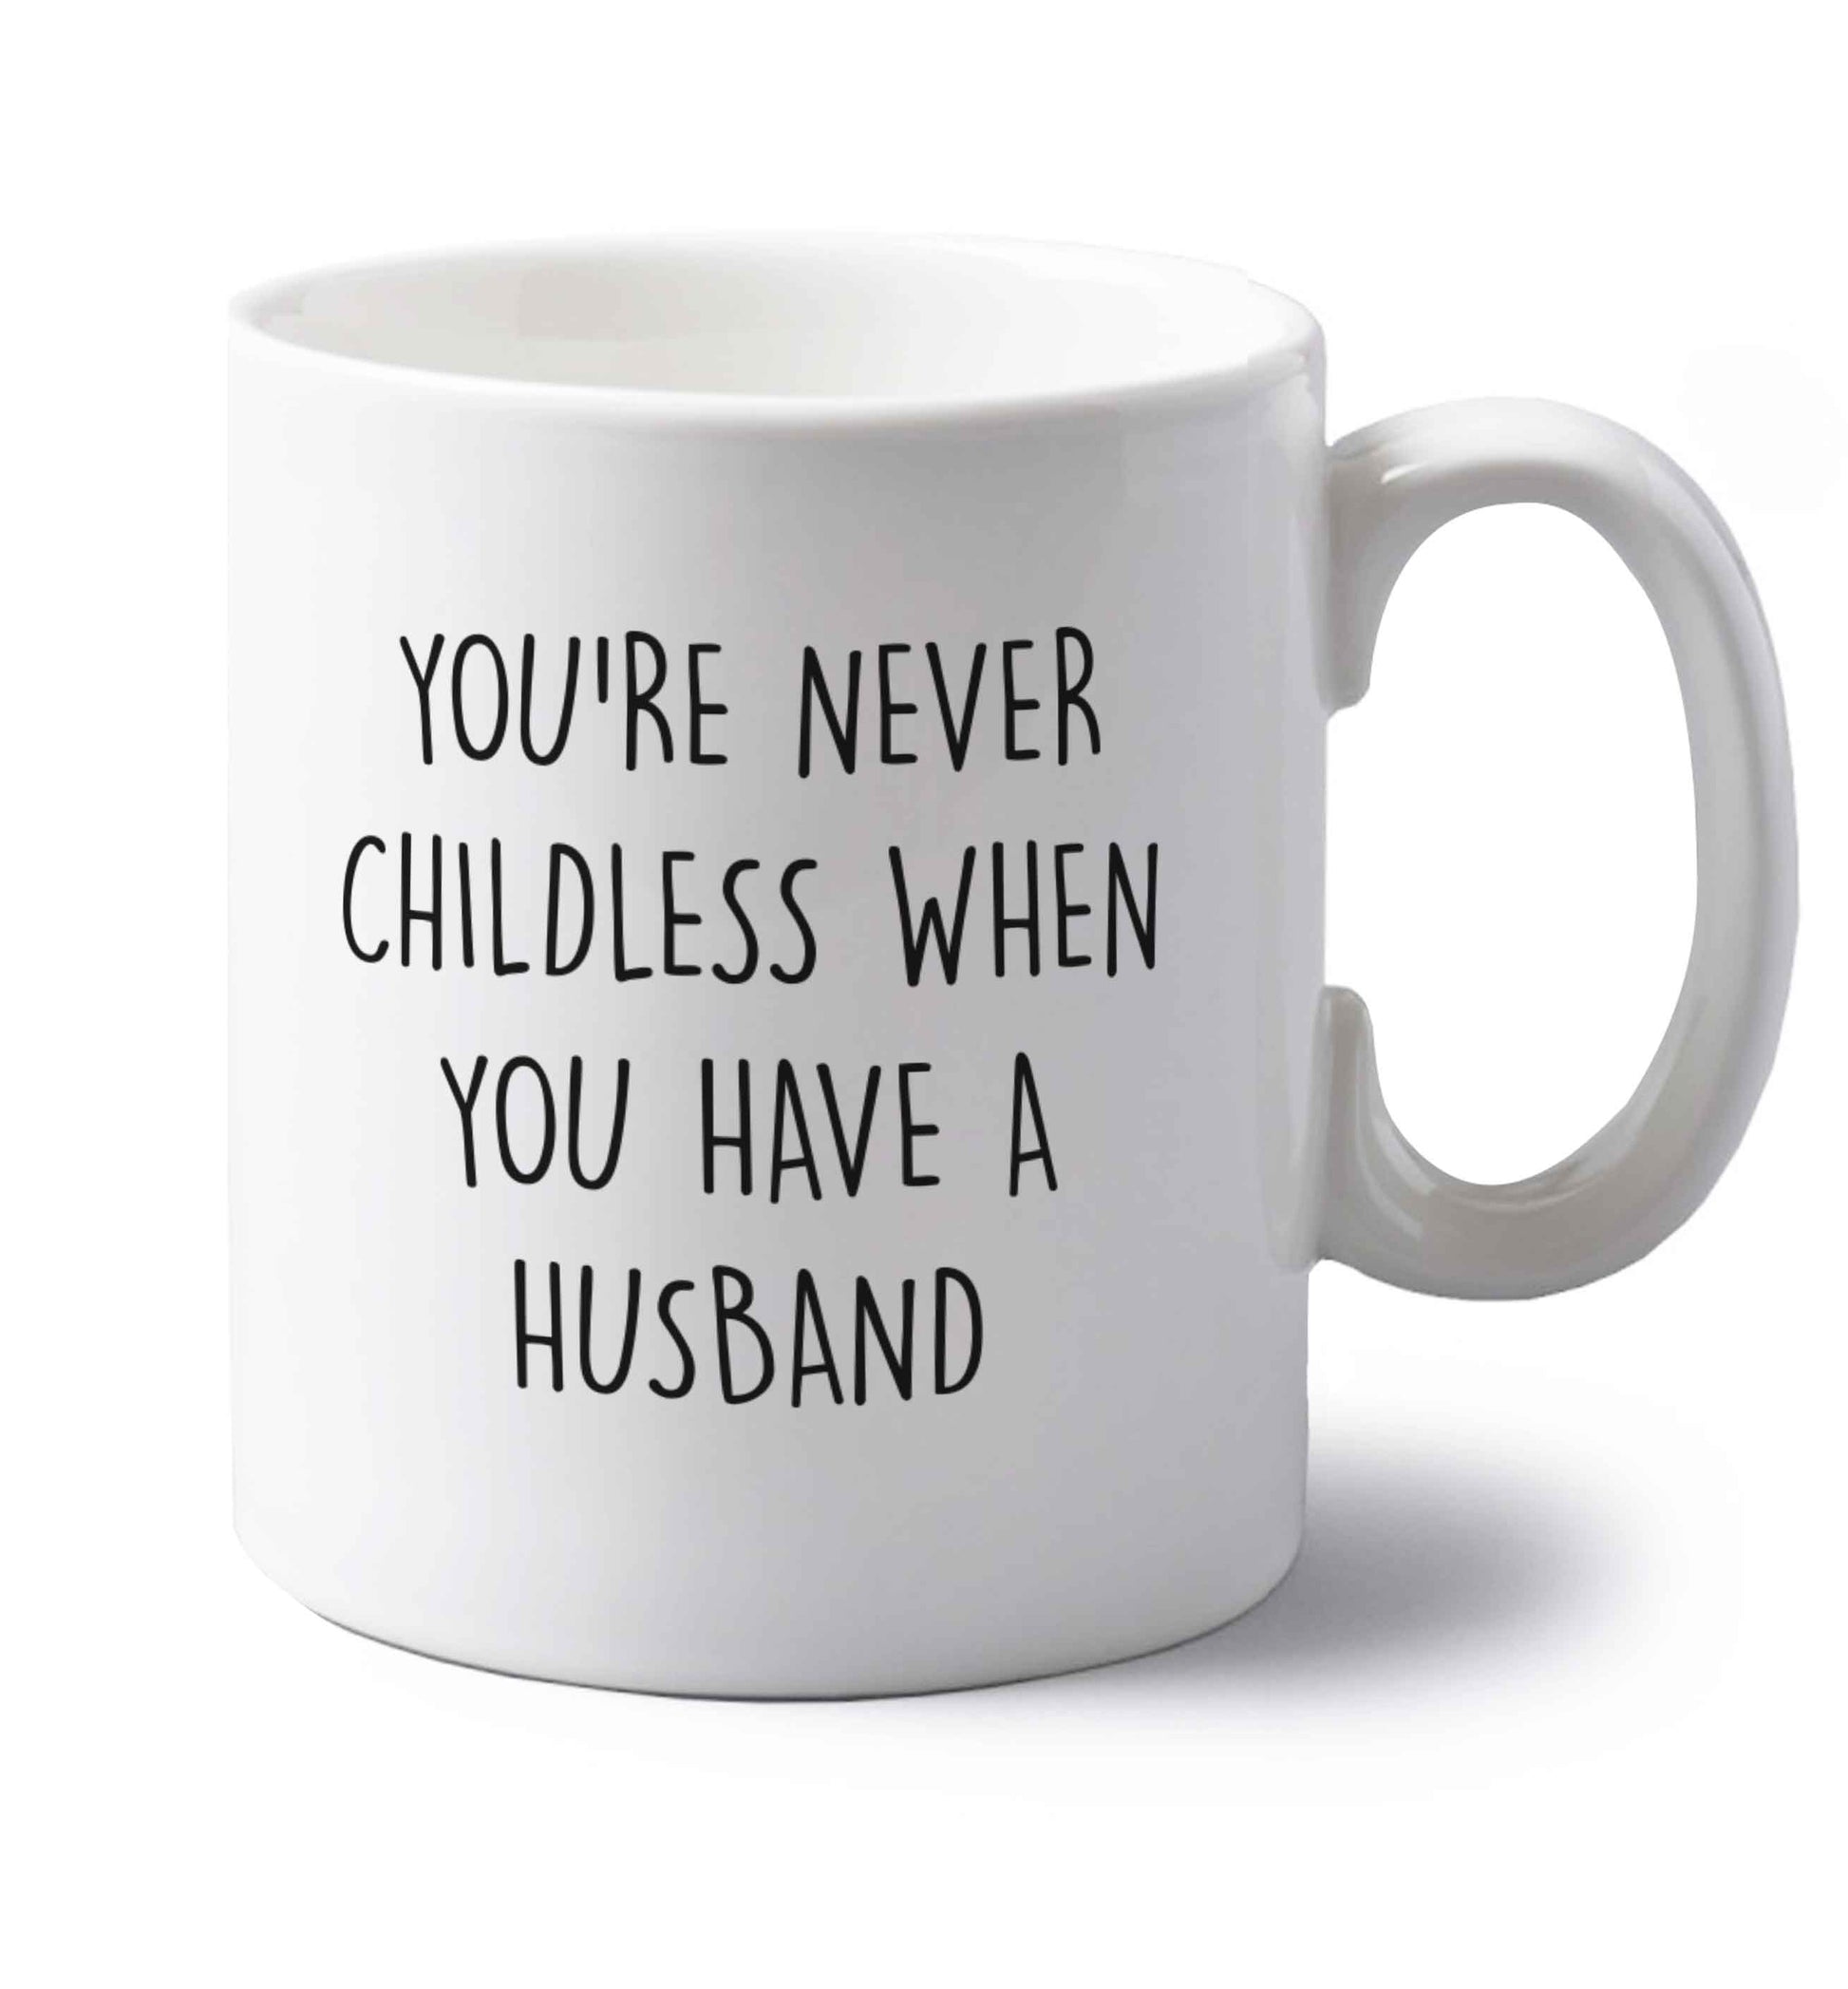 You're never childess when you have a husband left handed white ceramic mug 